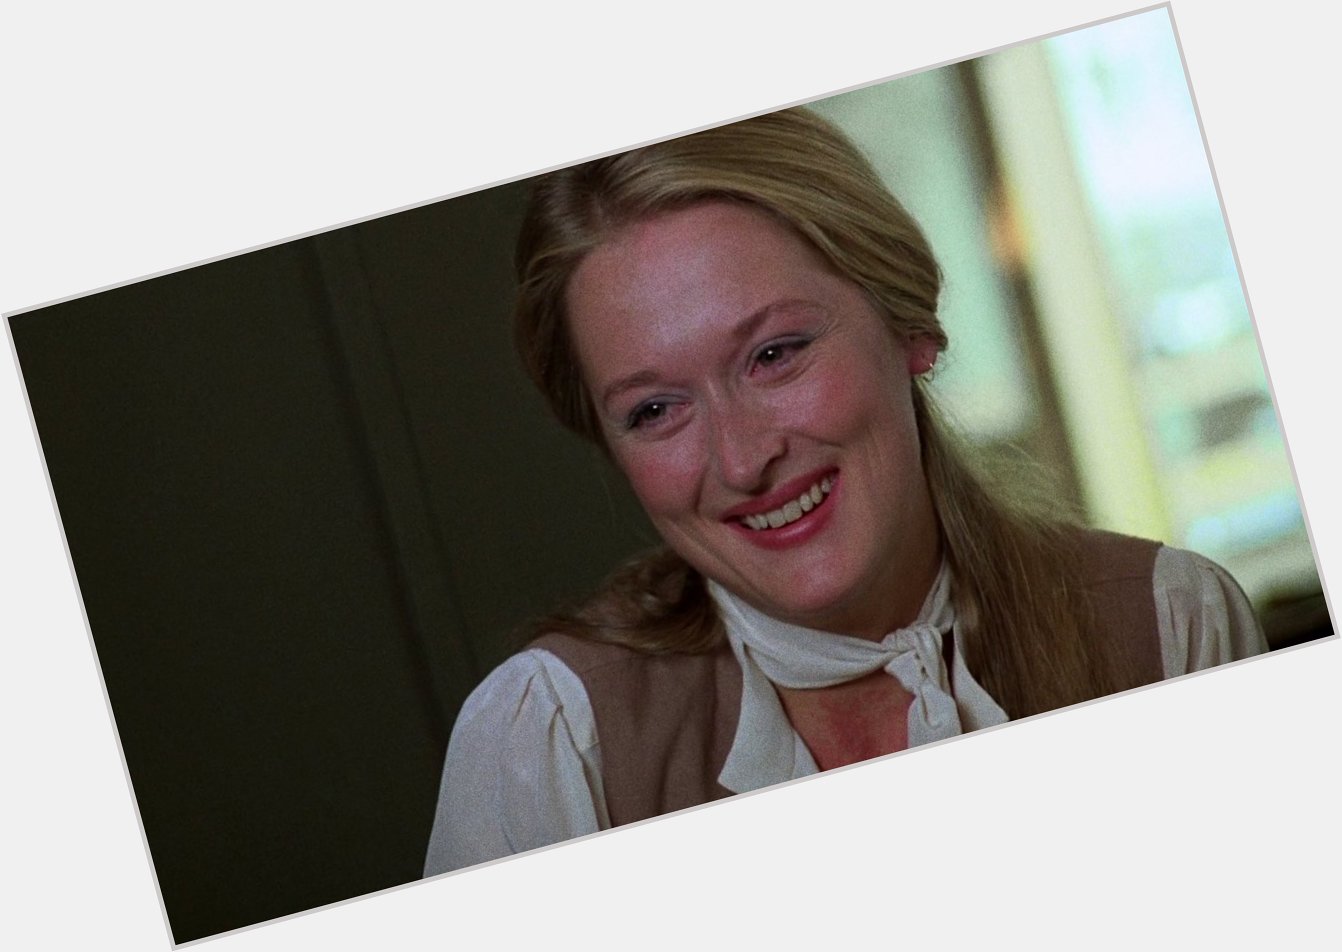 Wishing a happy birthday to Meryl Streep, one of the greatest actors of all time. 